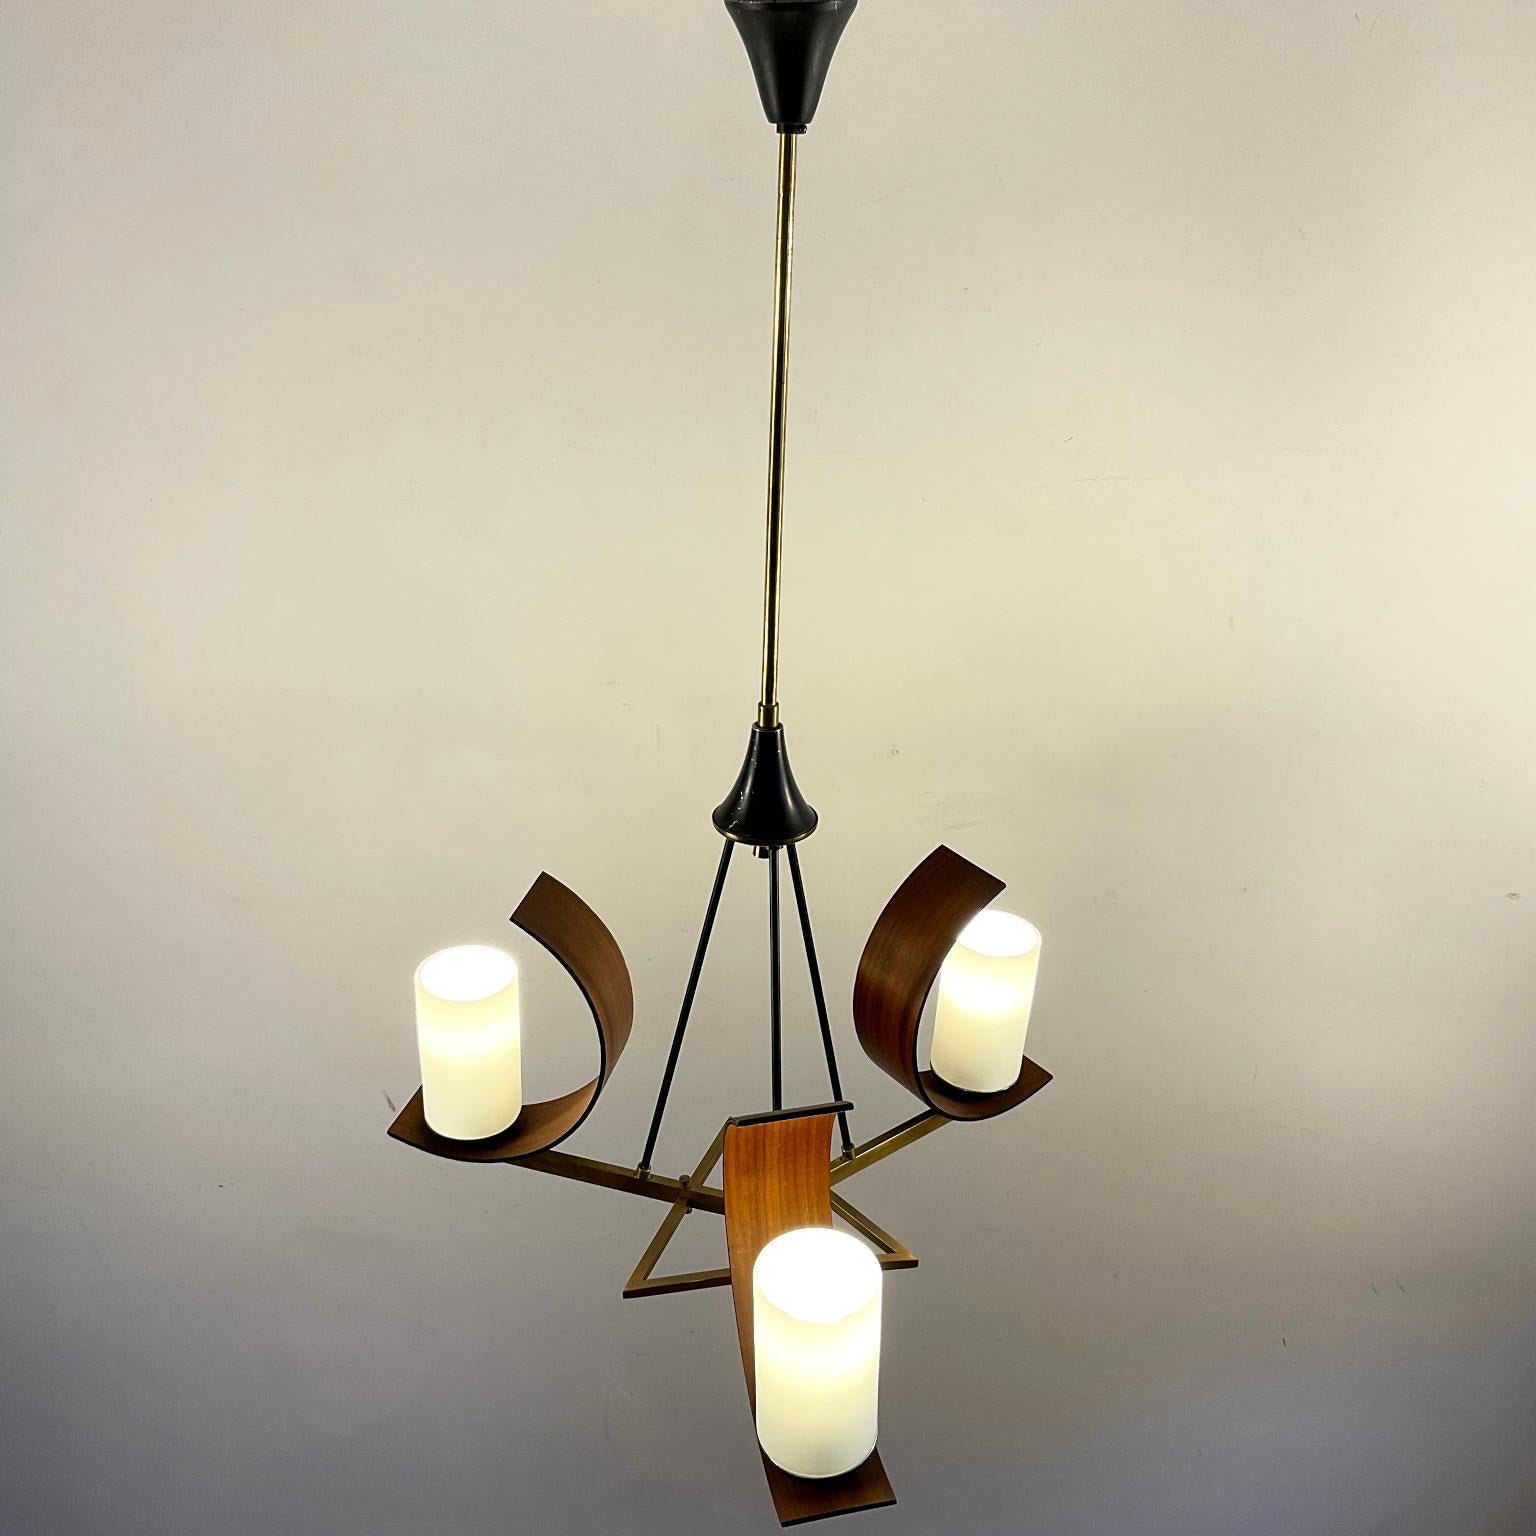 1960s Italian Ceiling Lamp Attributed to Stilnovo with 3 Opaline lampshades 4